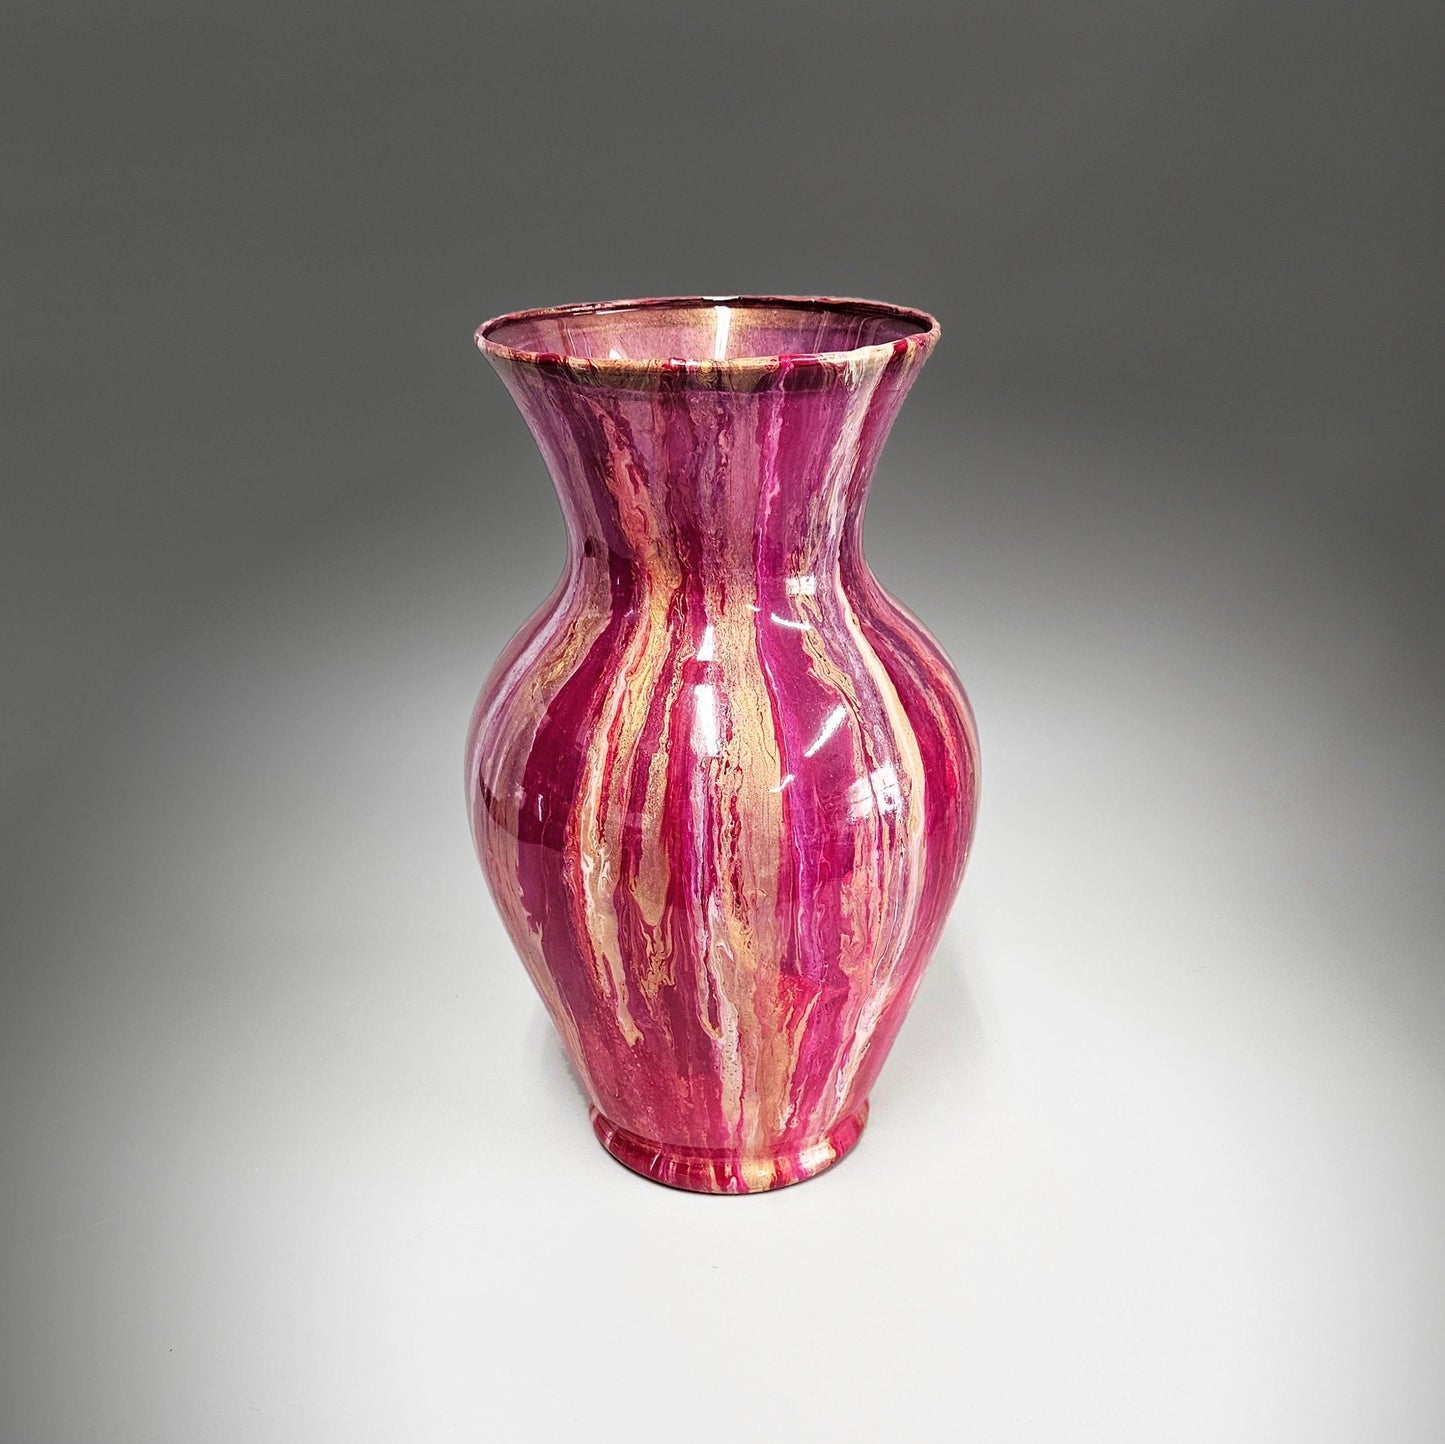 Glass Art Painted Vase in Magenta and Gold